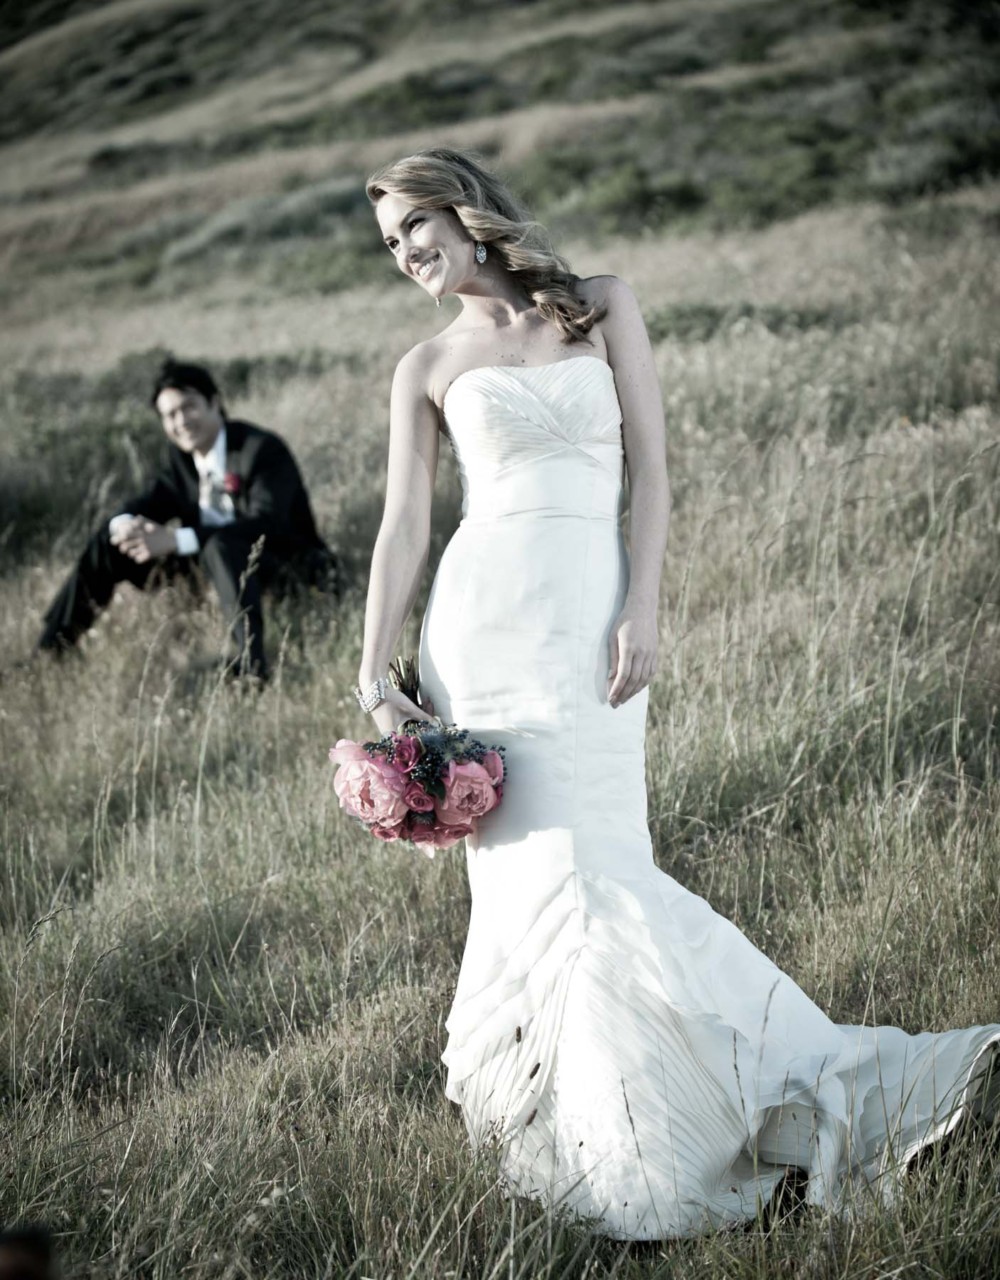 Looking for a budget wedding photographer in Girdwood?